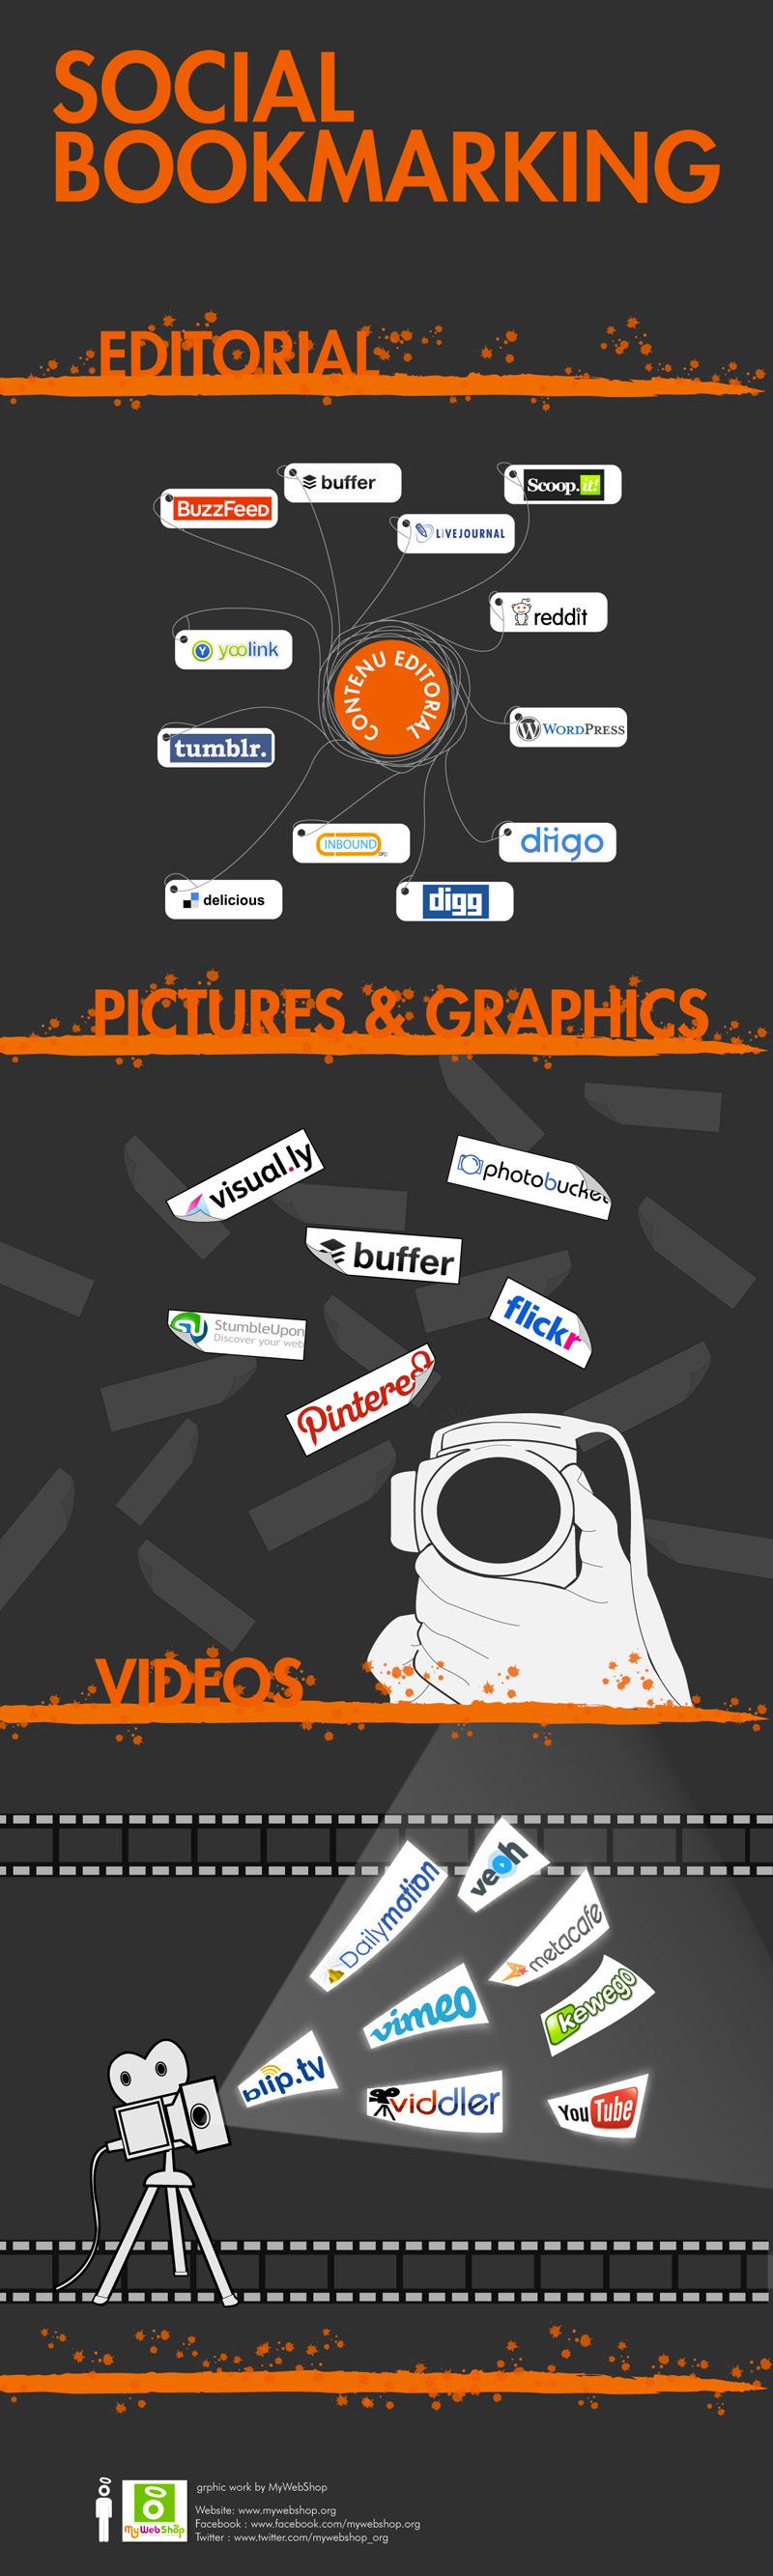 infographie social bookmarking